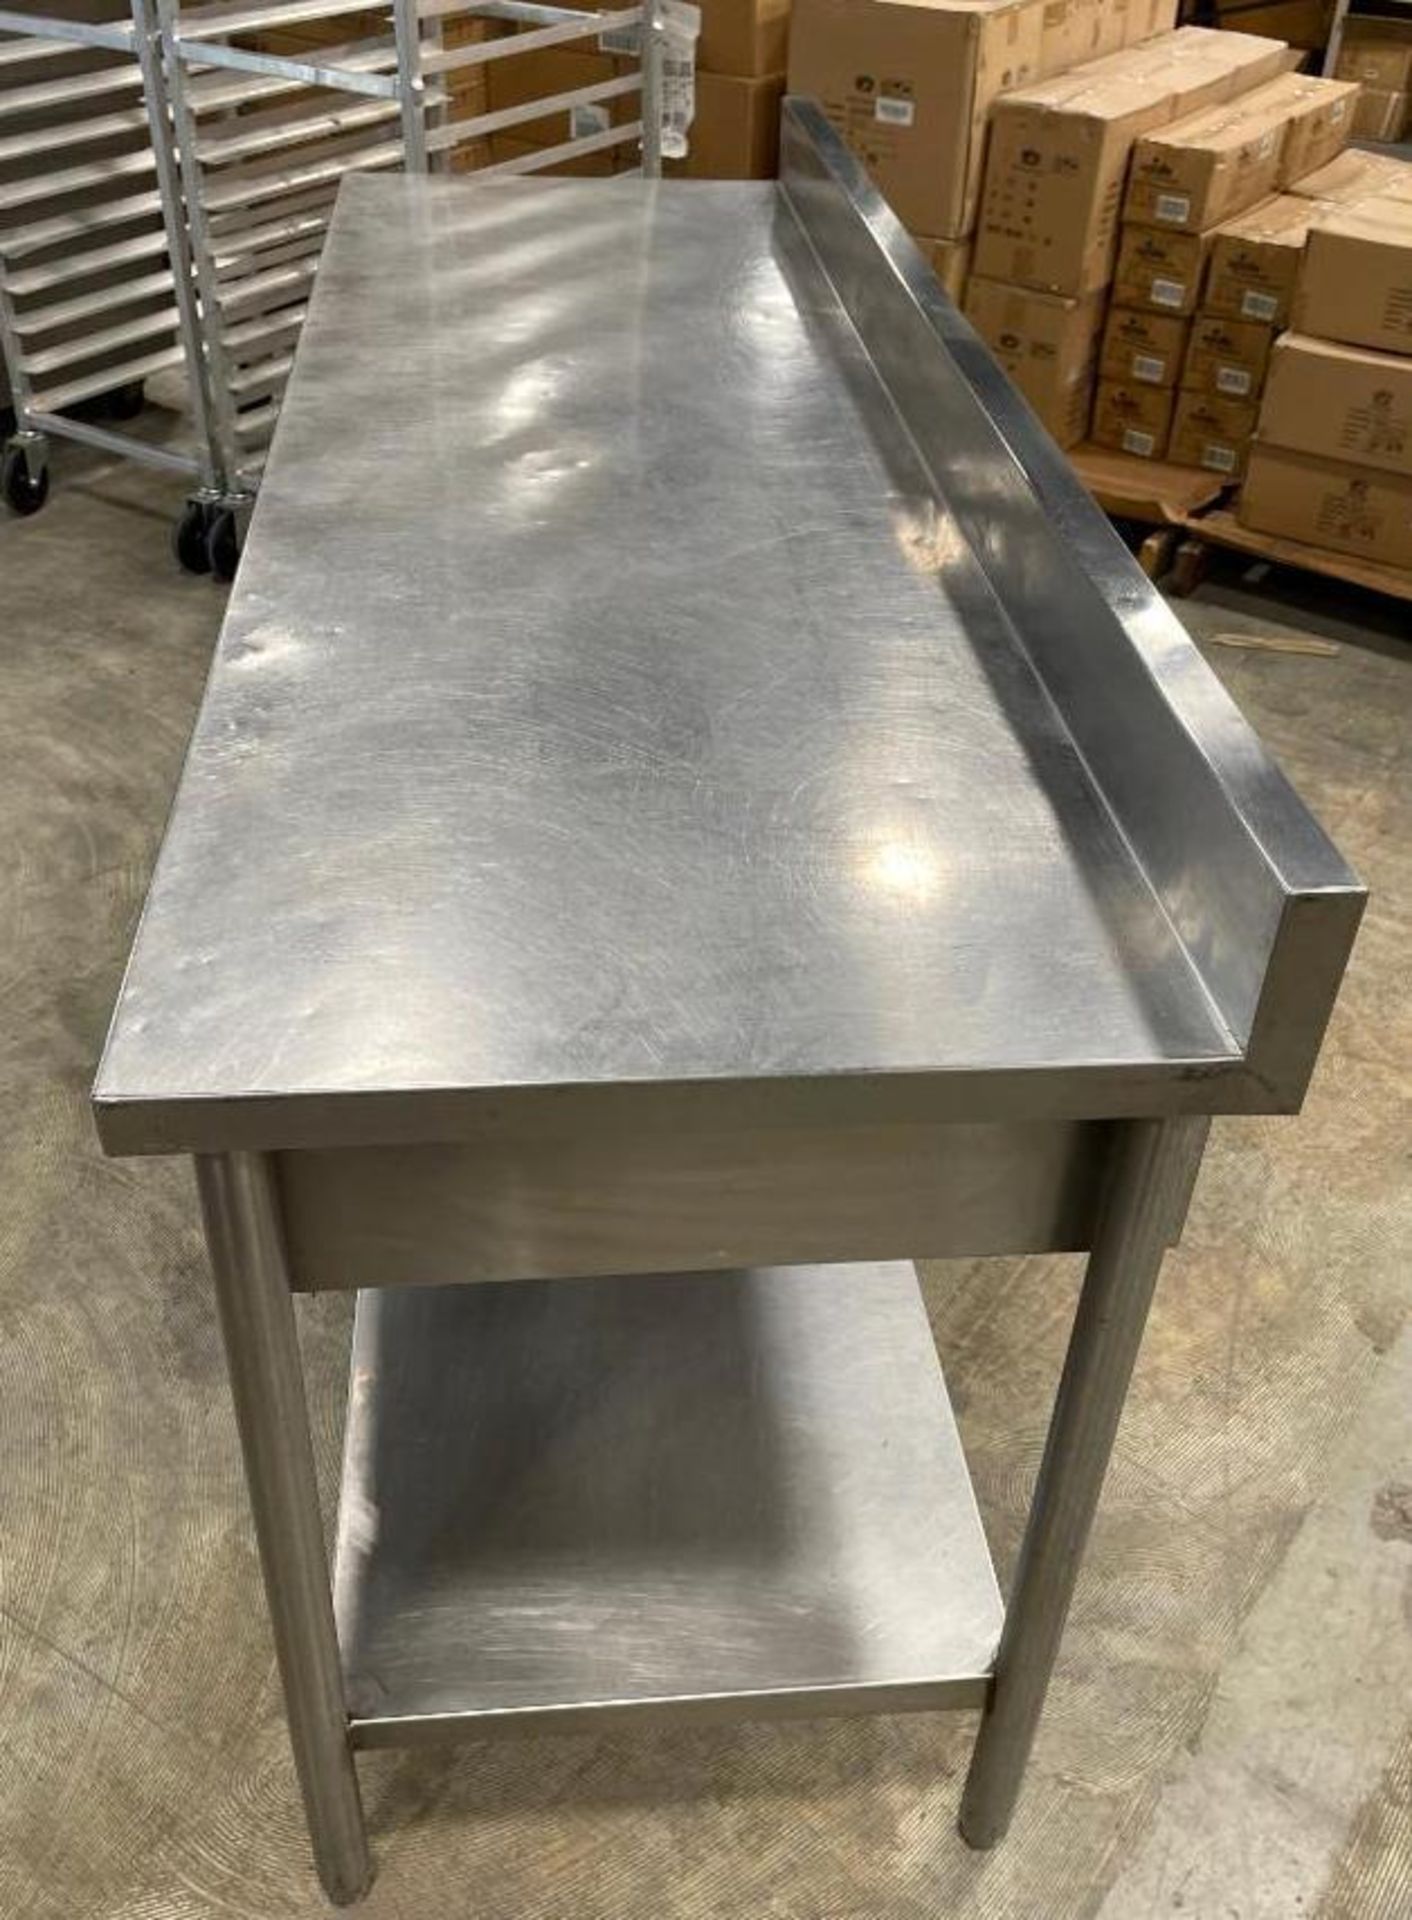 6' STAINLESS STEEL WORK TABLE WITH 2 DRAWERS AND UNDERSHELF - Image 3 of 7